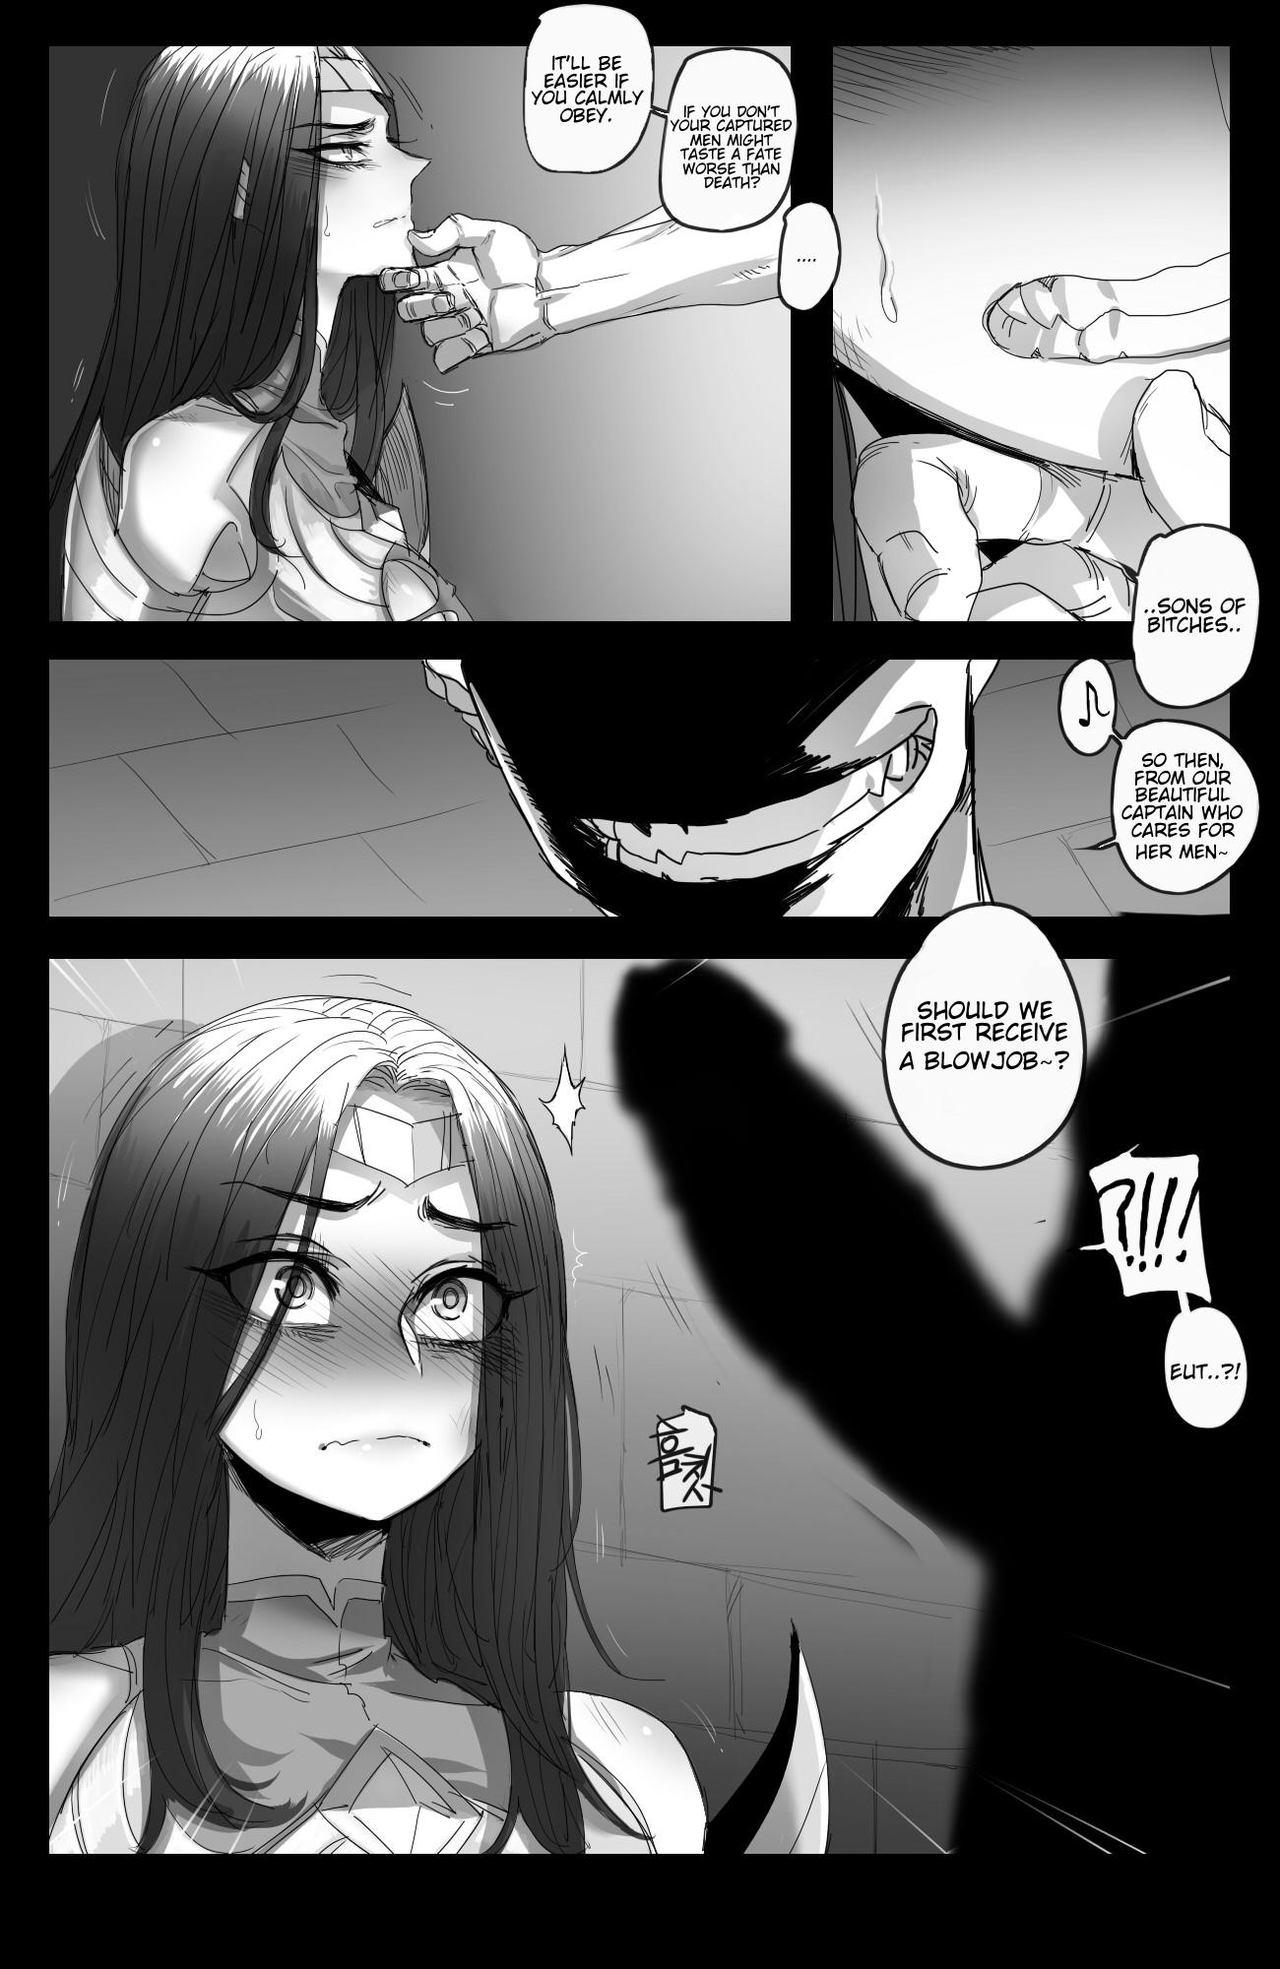 Leche The Fall of Irelia - League of legends Prostitute - Page 4